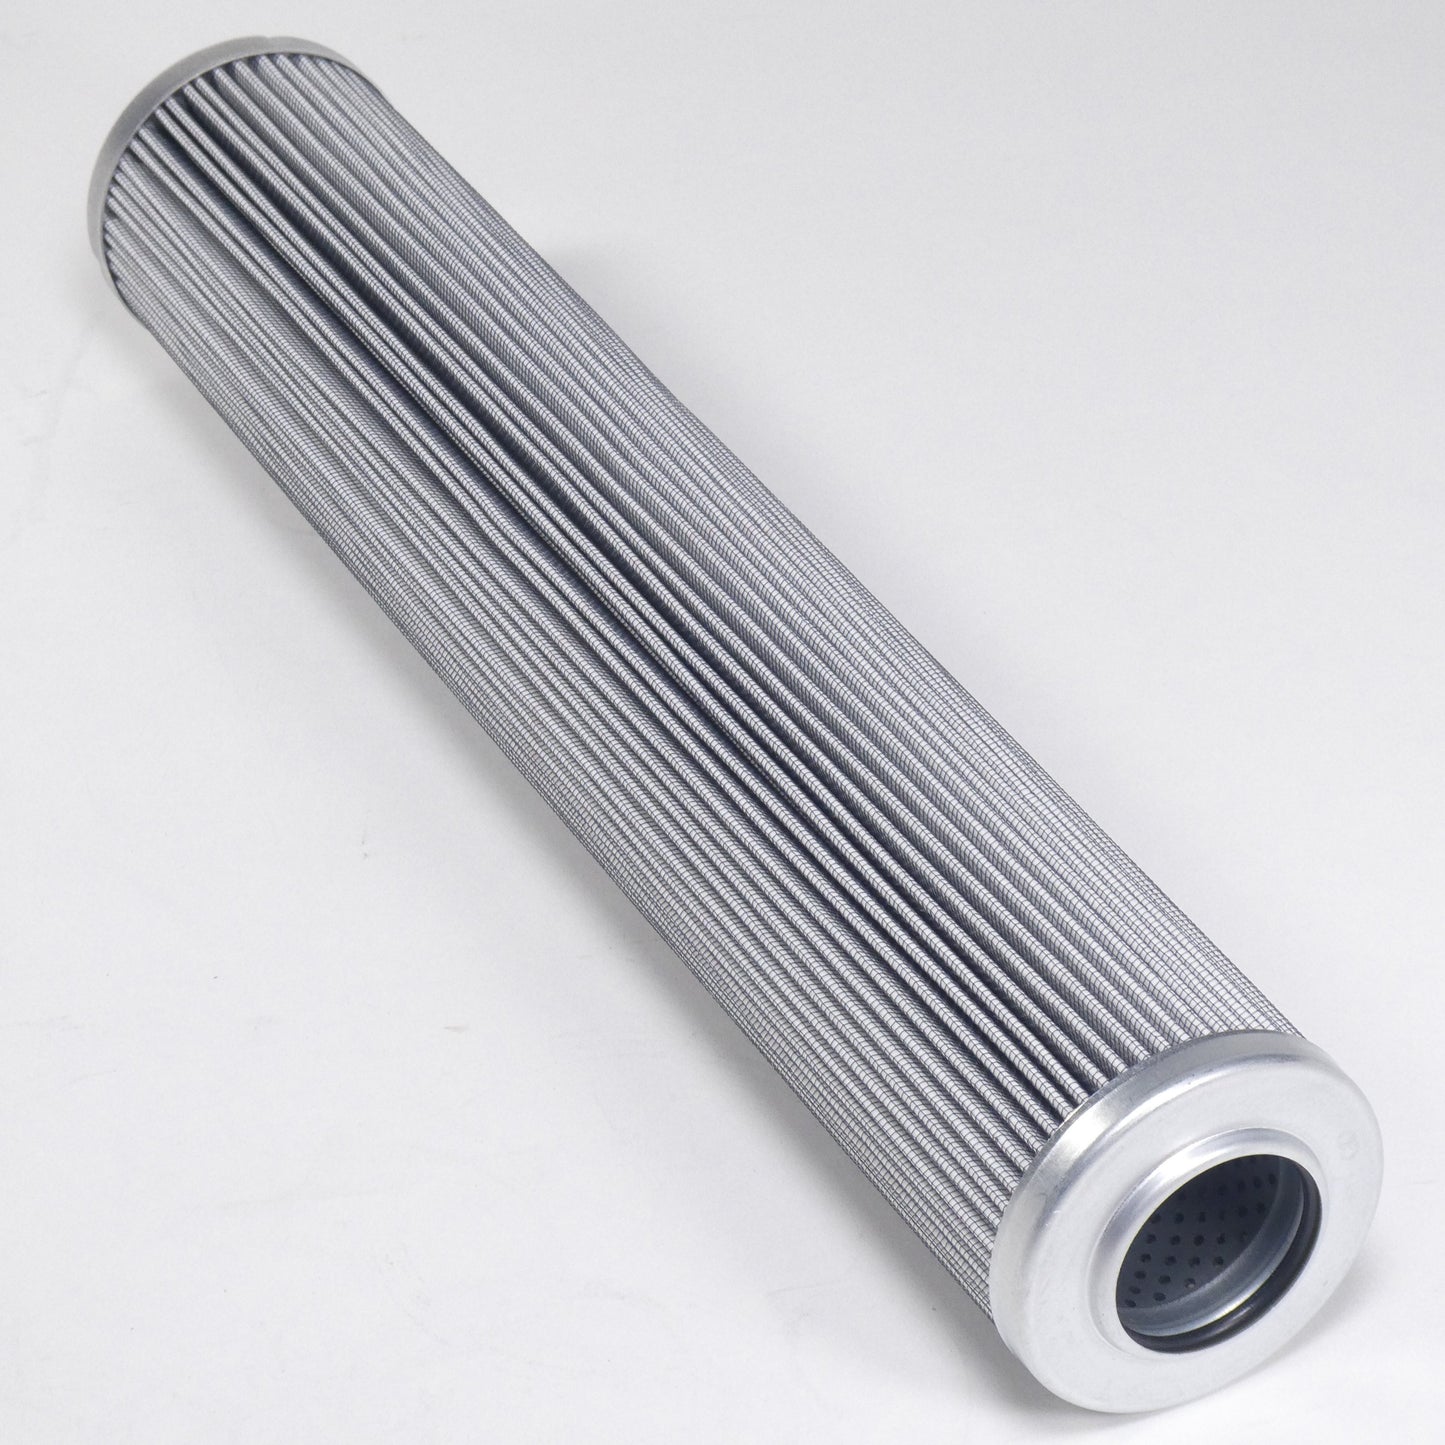 Hydrafil Replacement Filter Element for Filtersoft M69616MAAB